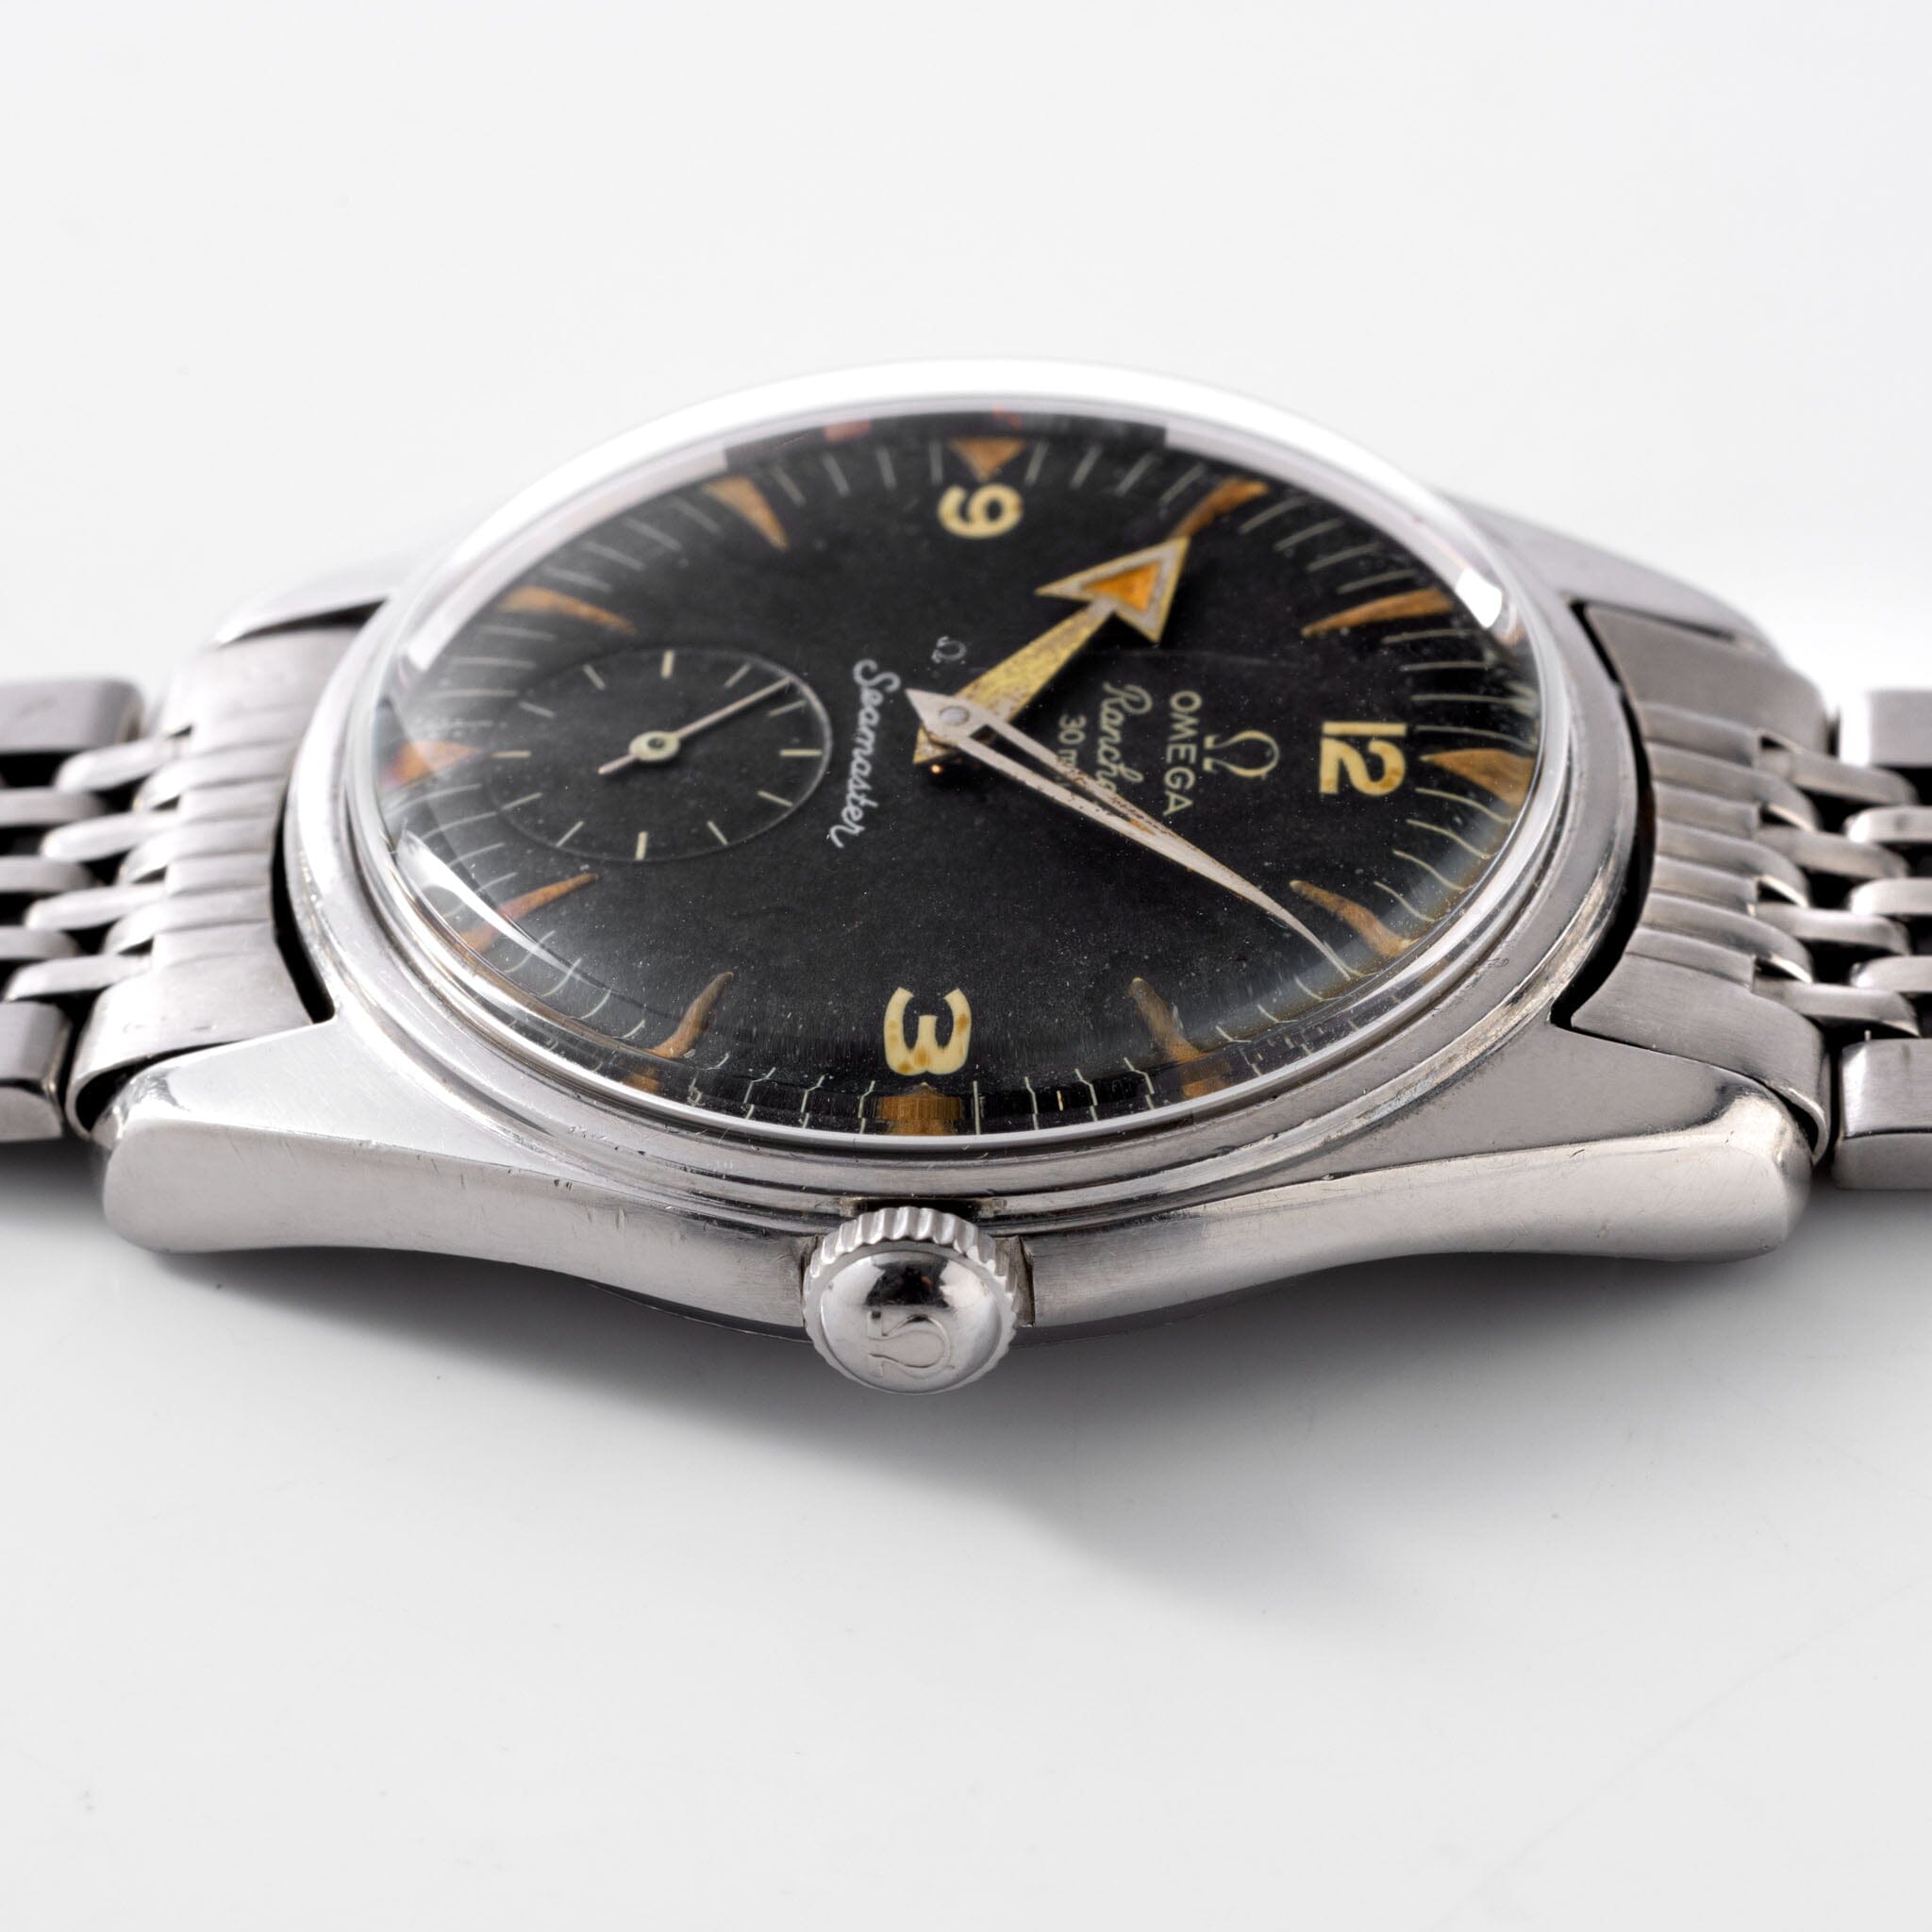 Omega Ranchero Seamaster Issued to the Fuerza Aérea Peru ref CK2990